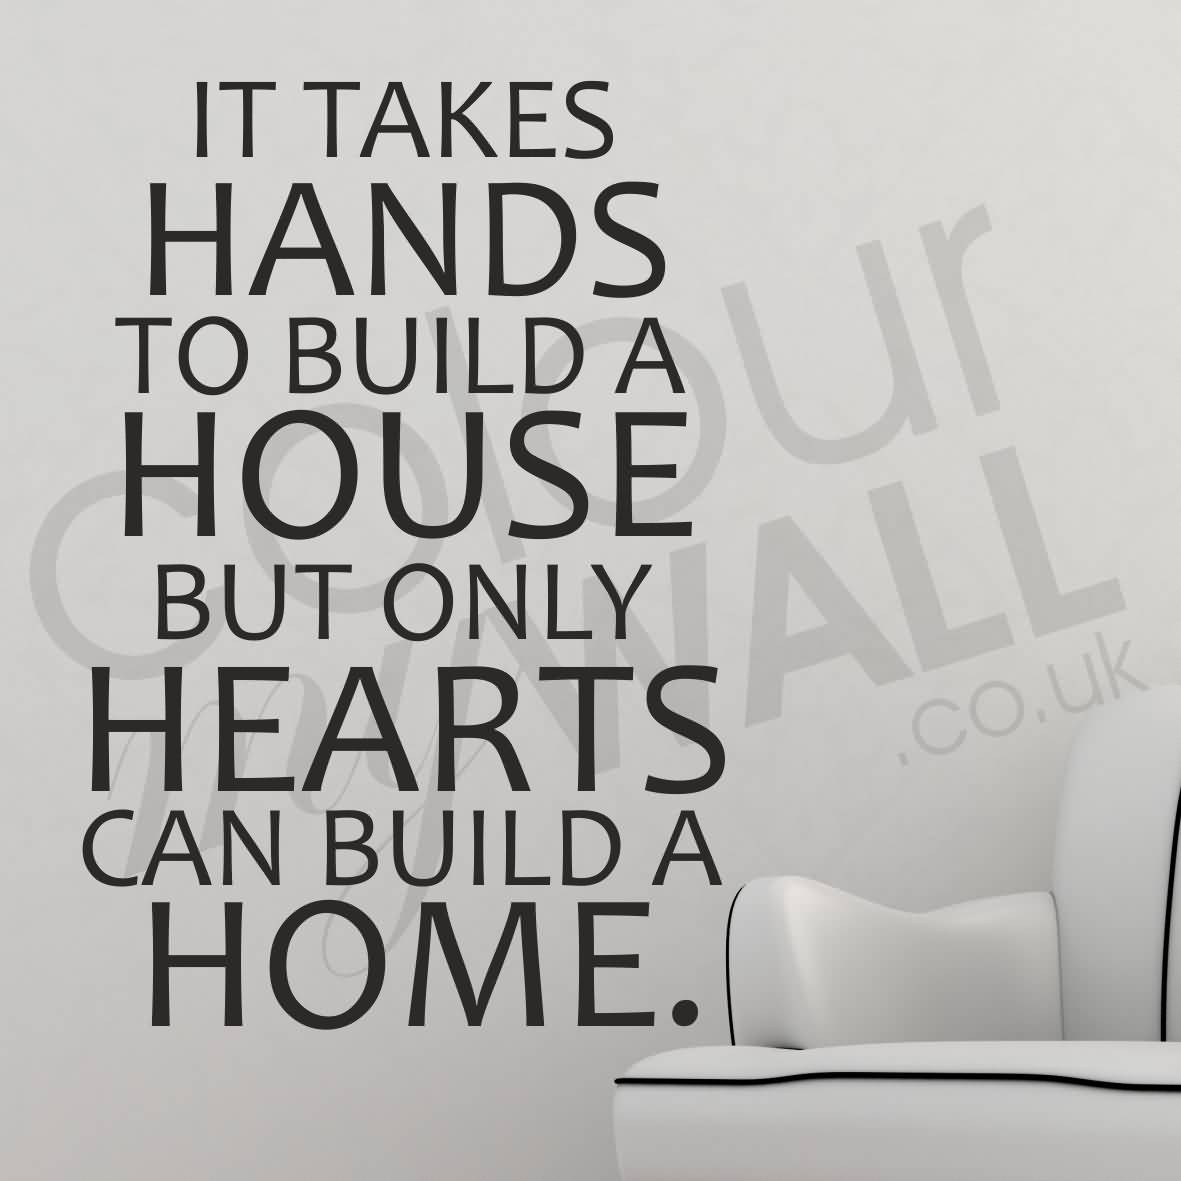 It takes hands to build a house, but only hearts can build a home